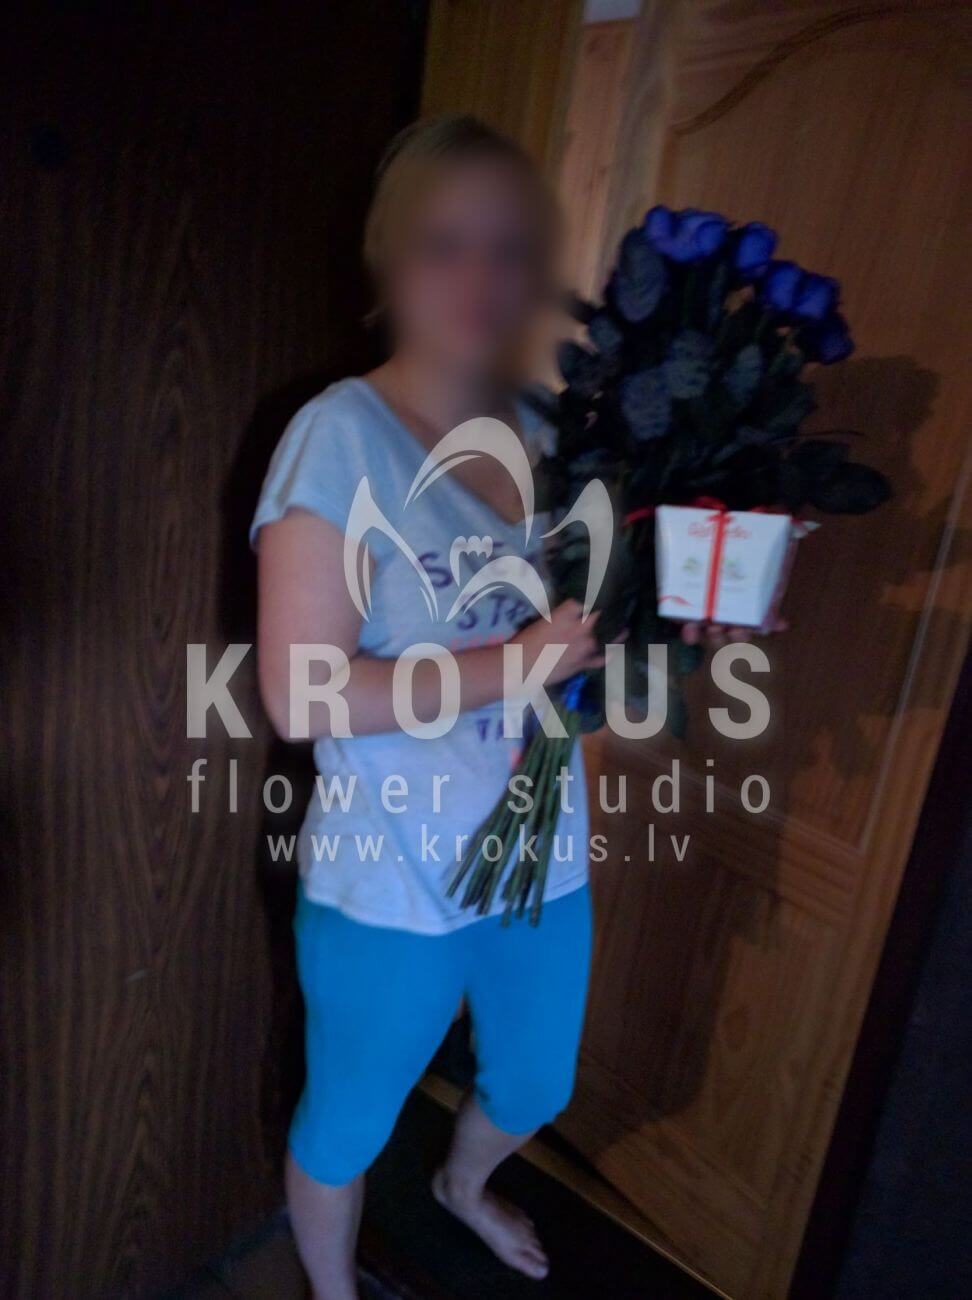 Deliver flowers to Latvia (blue roses)